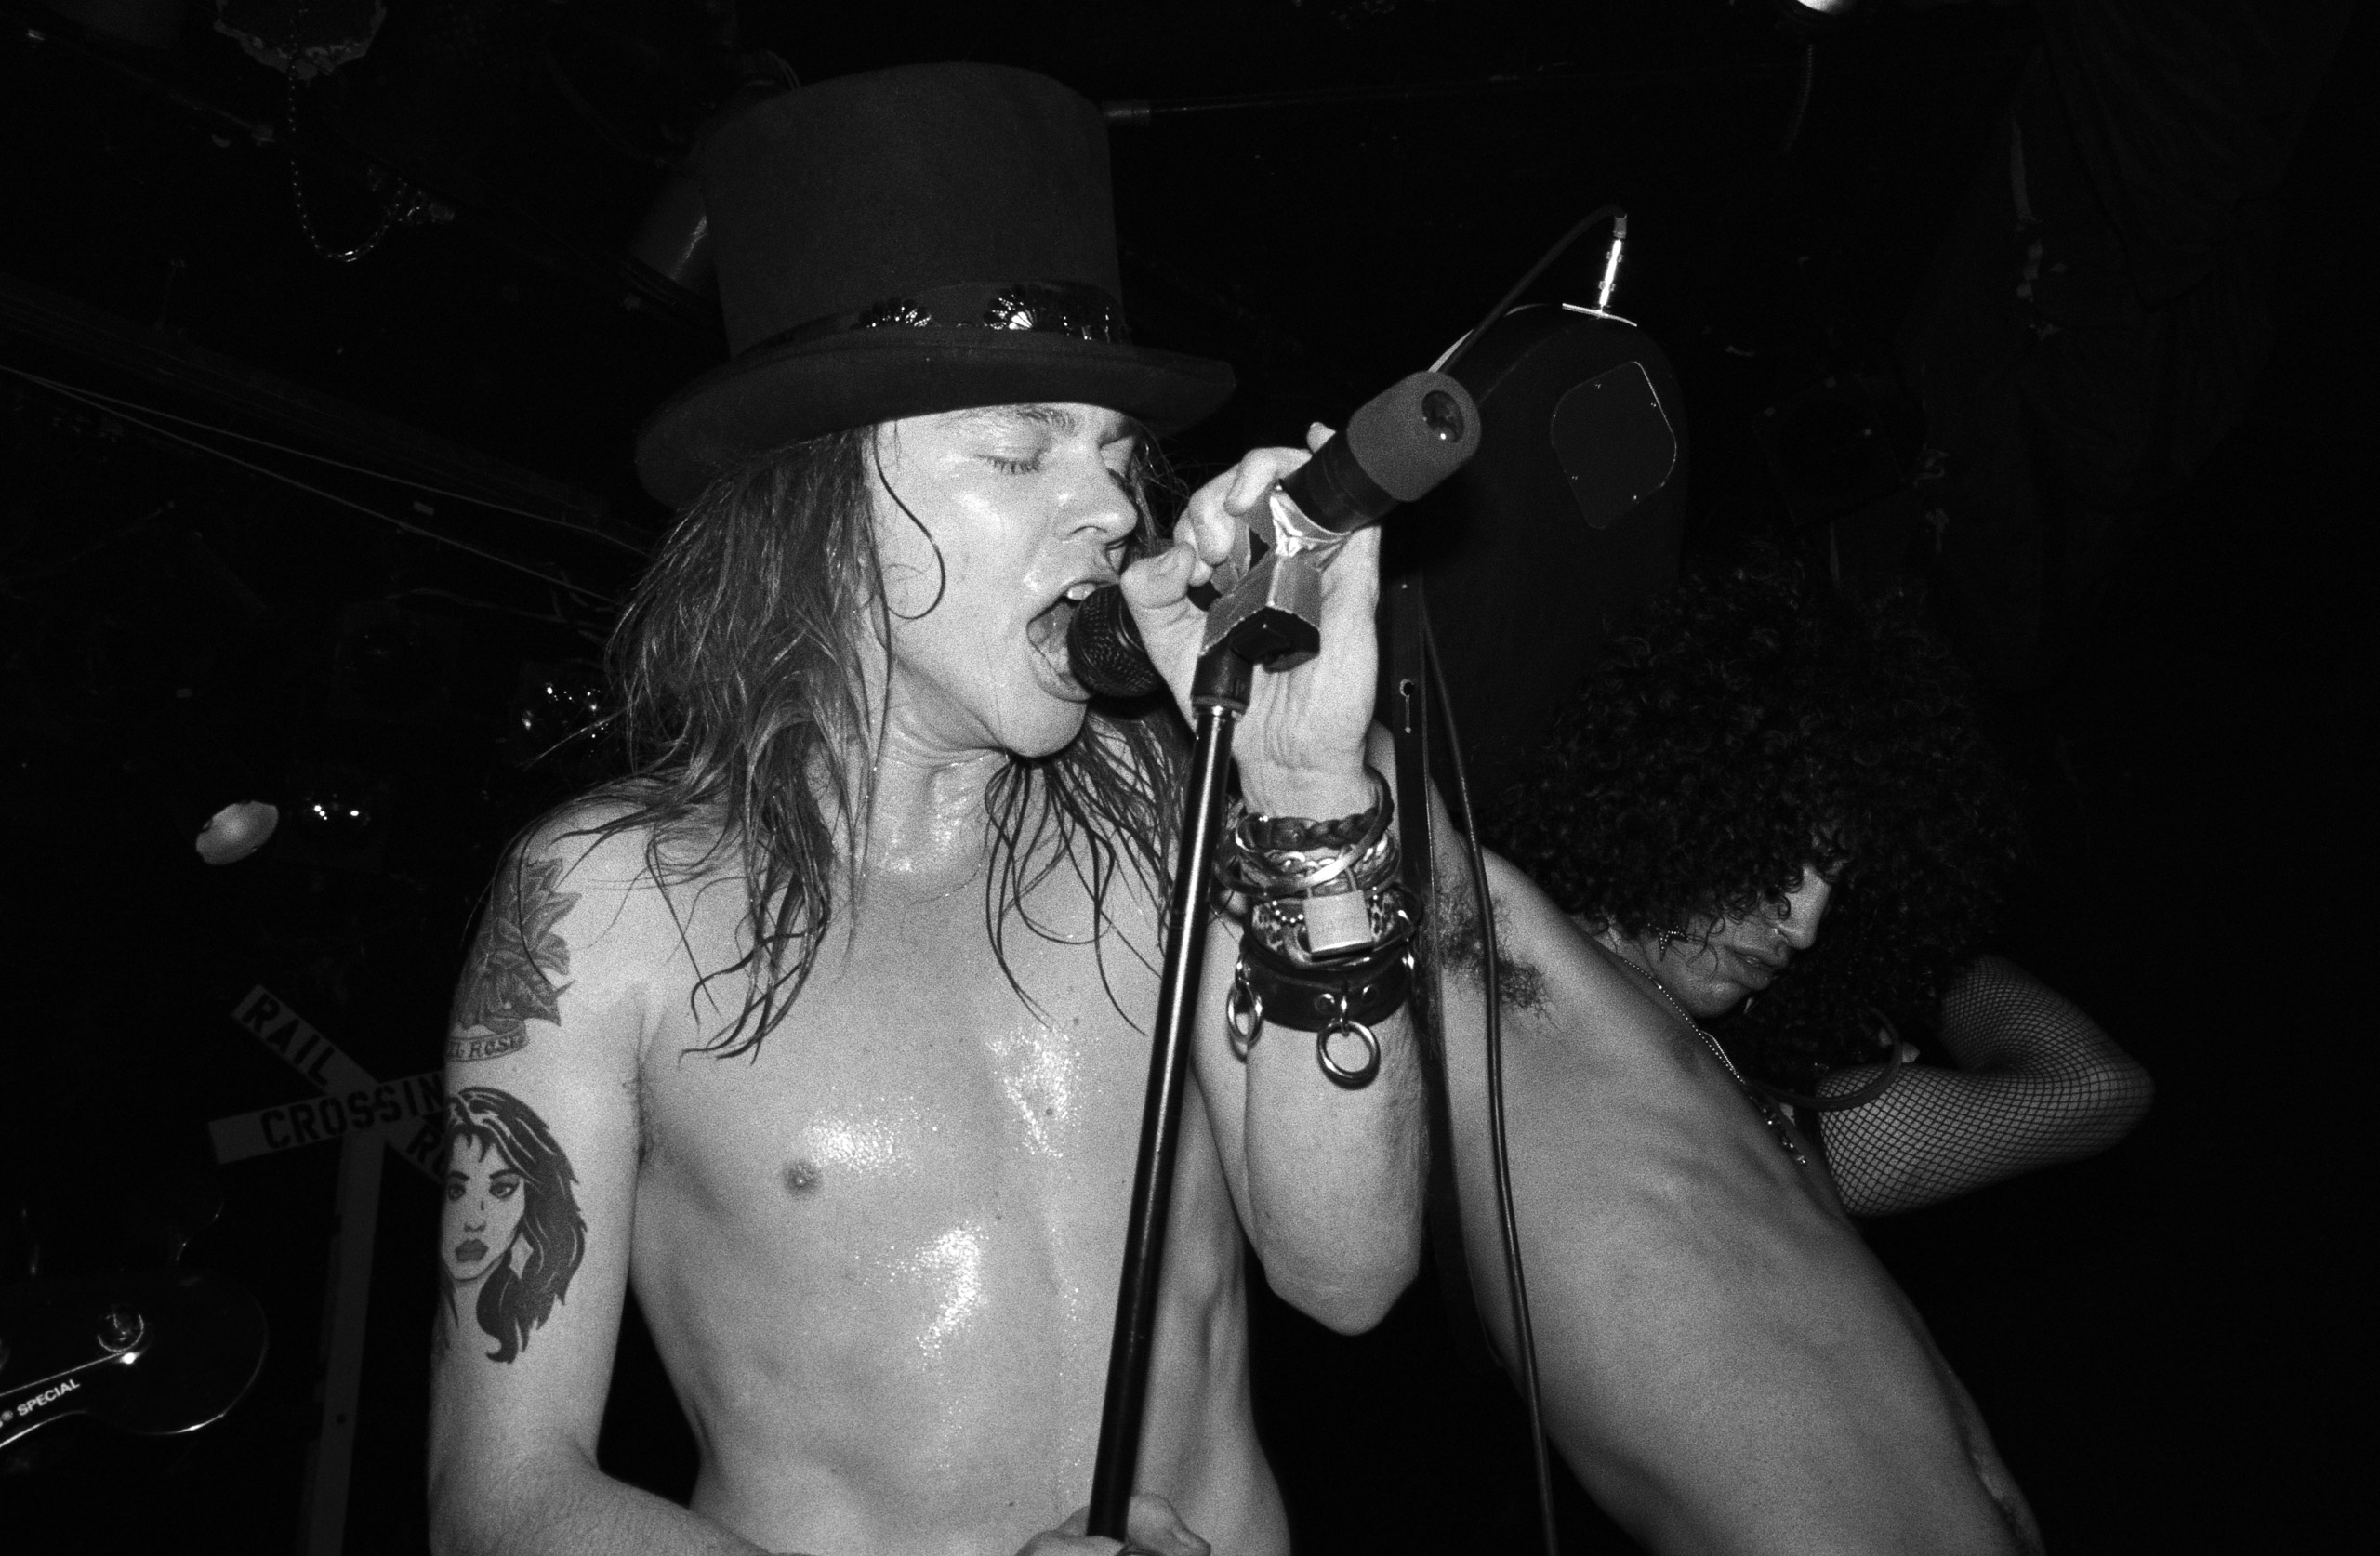 Axl Rose and Slash of Guns n' Roses perform  at the Roxy Theatre on Mar. 25, 1986 in Los Angeles